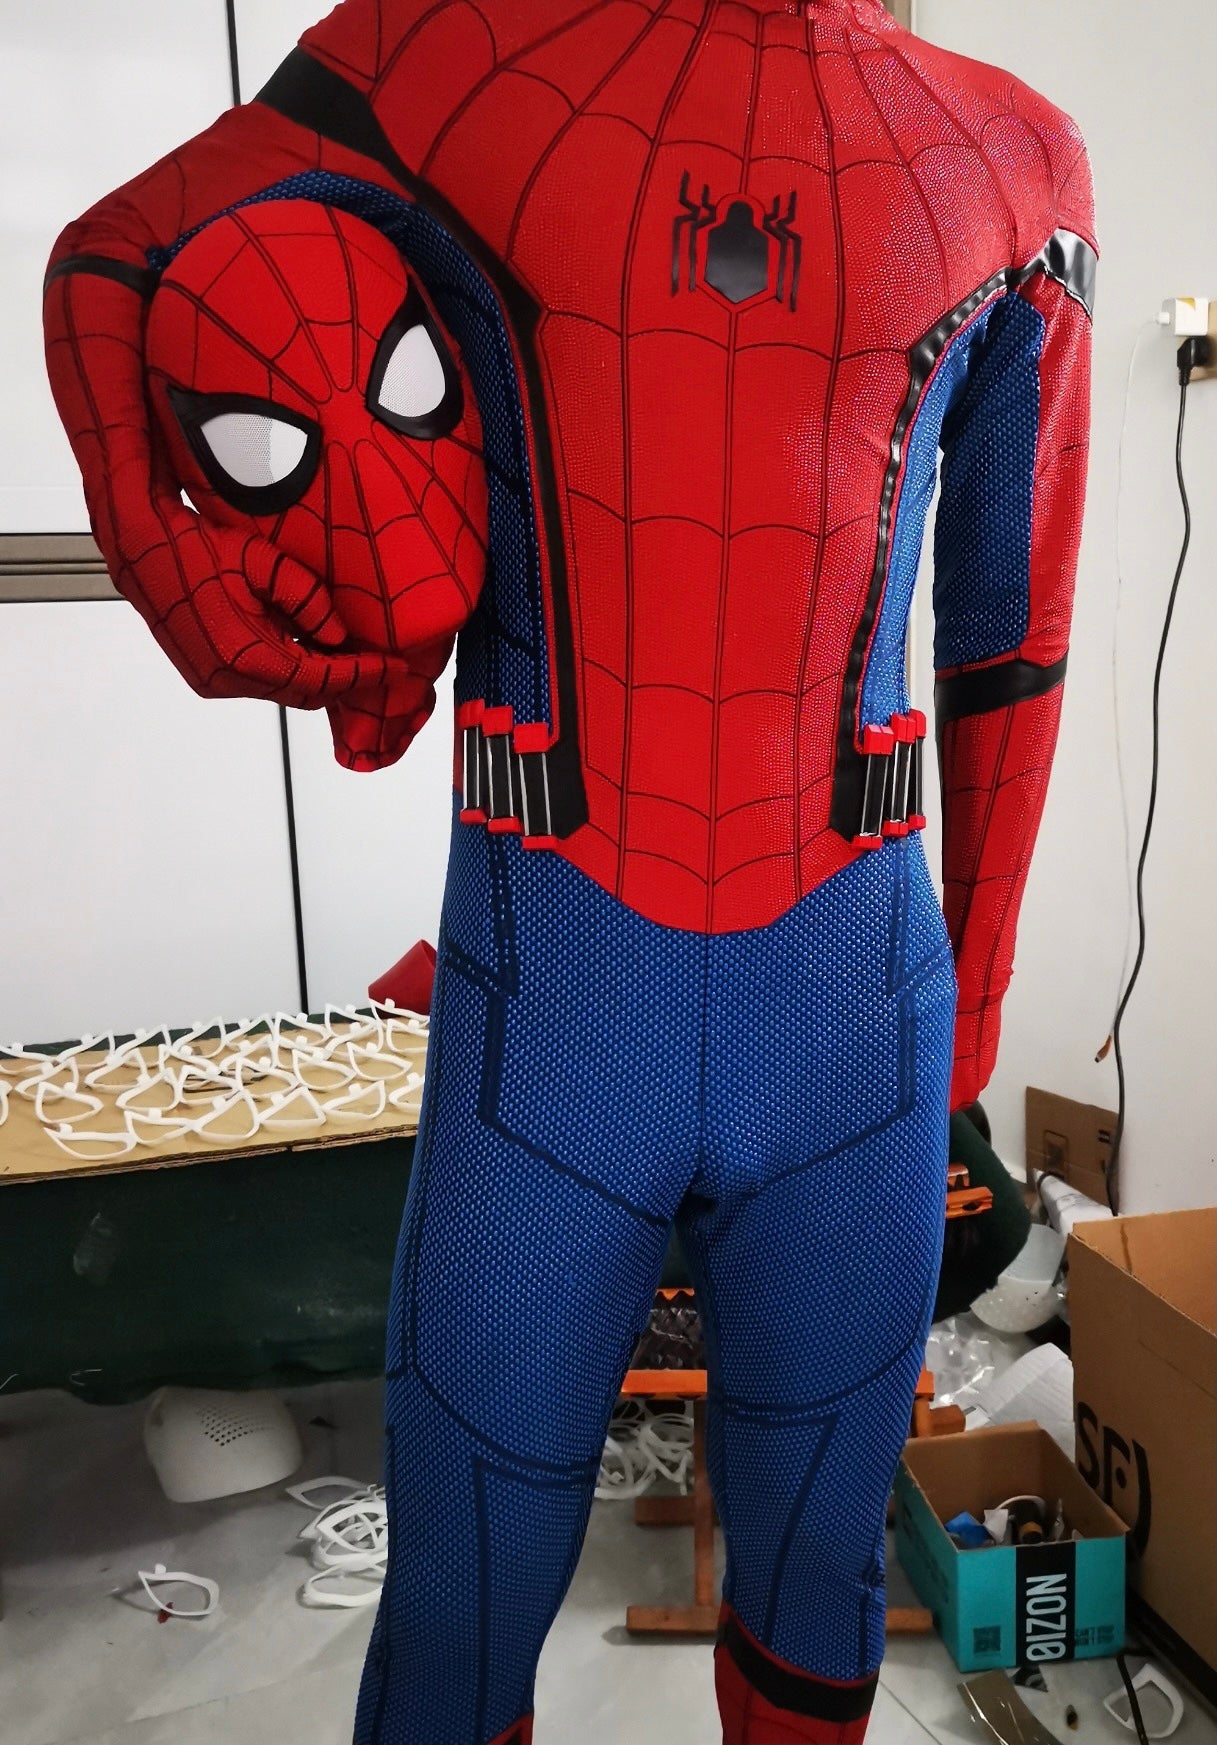 Discover more than 200 spider homecoming suit best